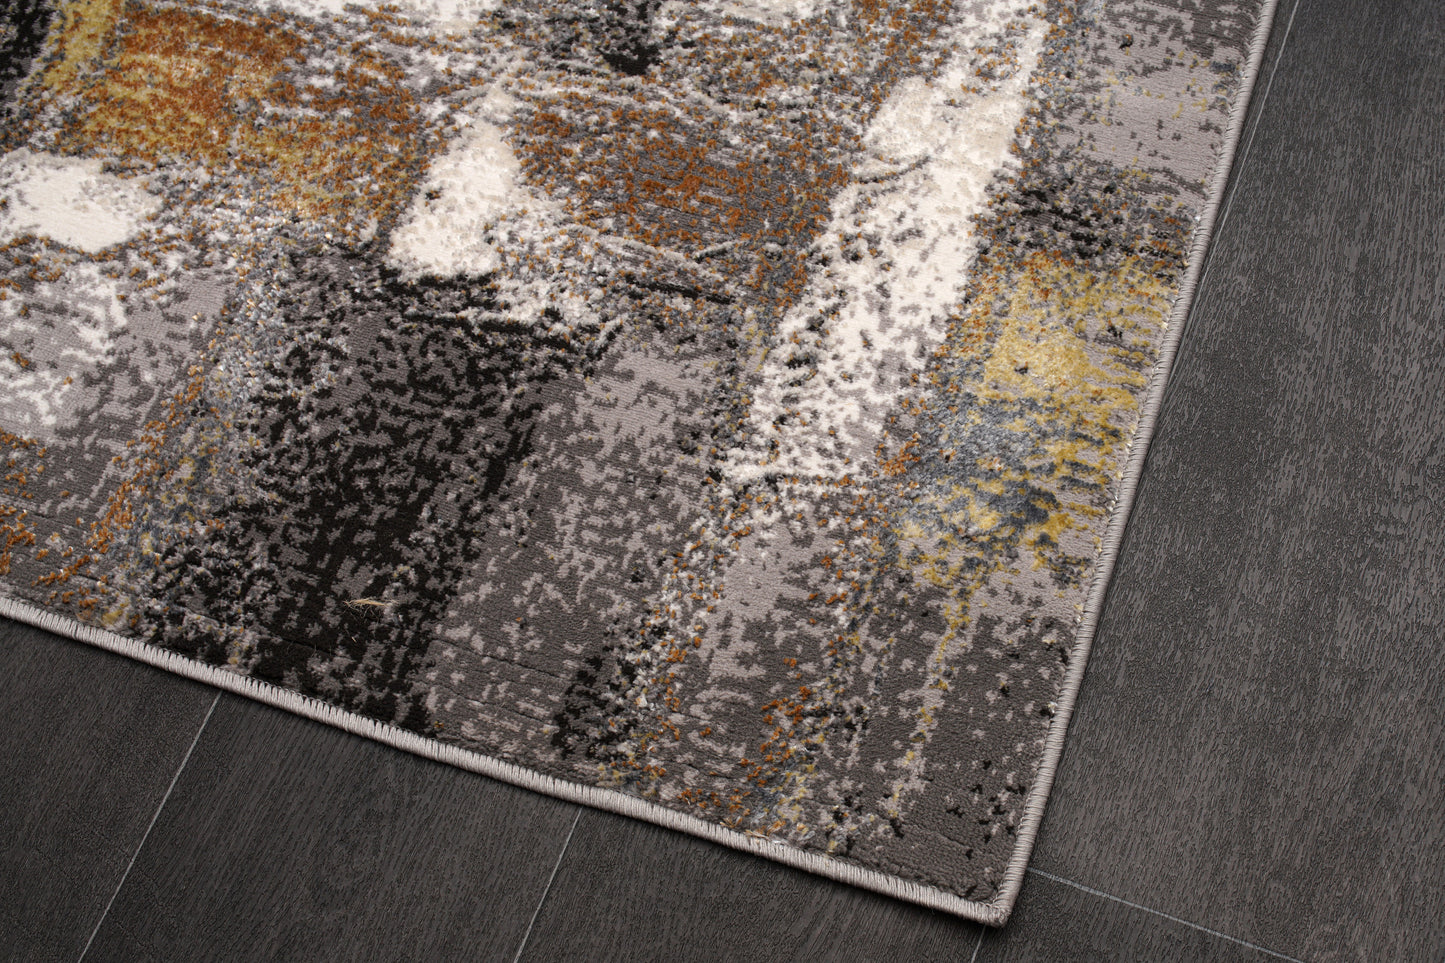 Cream Copper Gold Grey Metalic Rustic Abstract Patches Pattern Area Rug